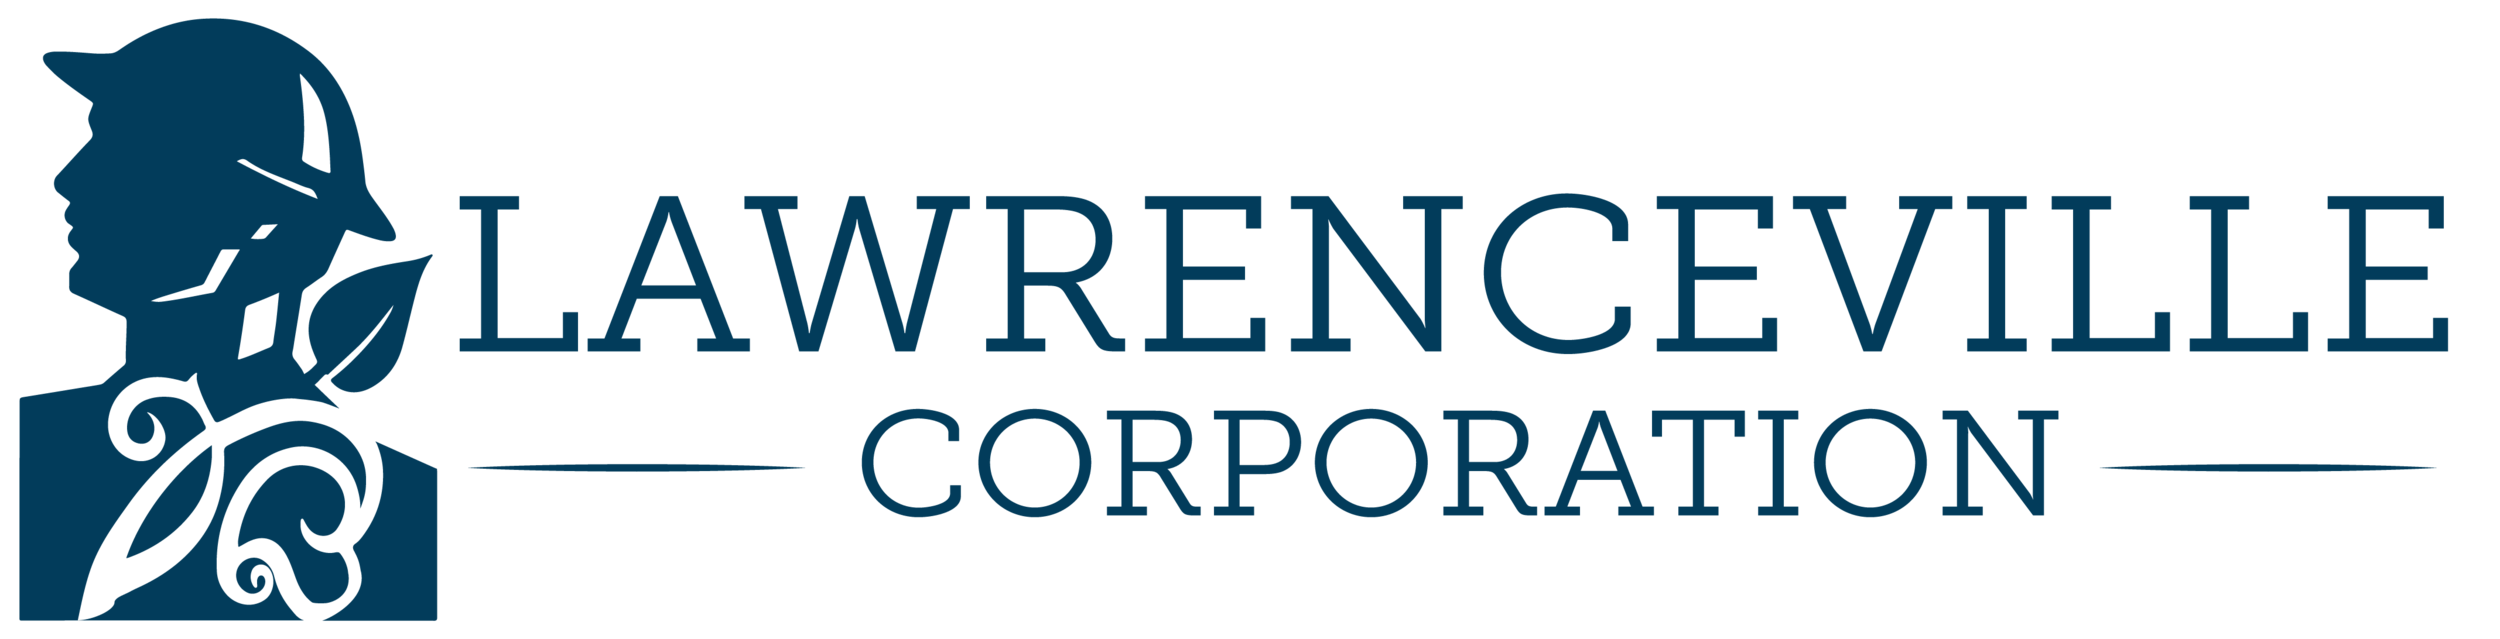 Lawrenceville Corp Logo.png